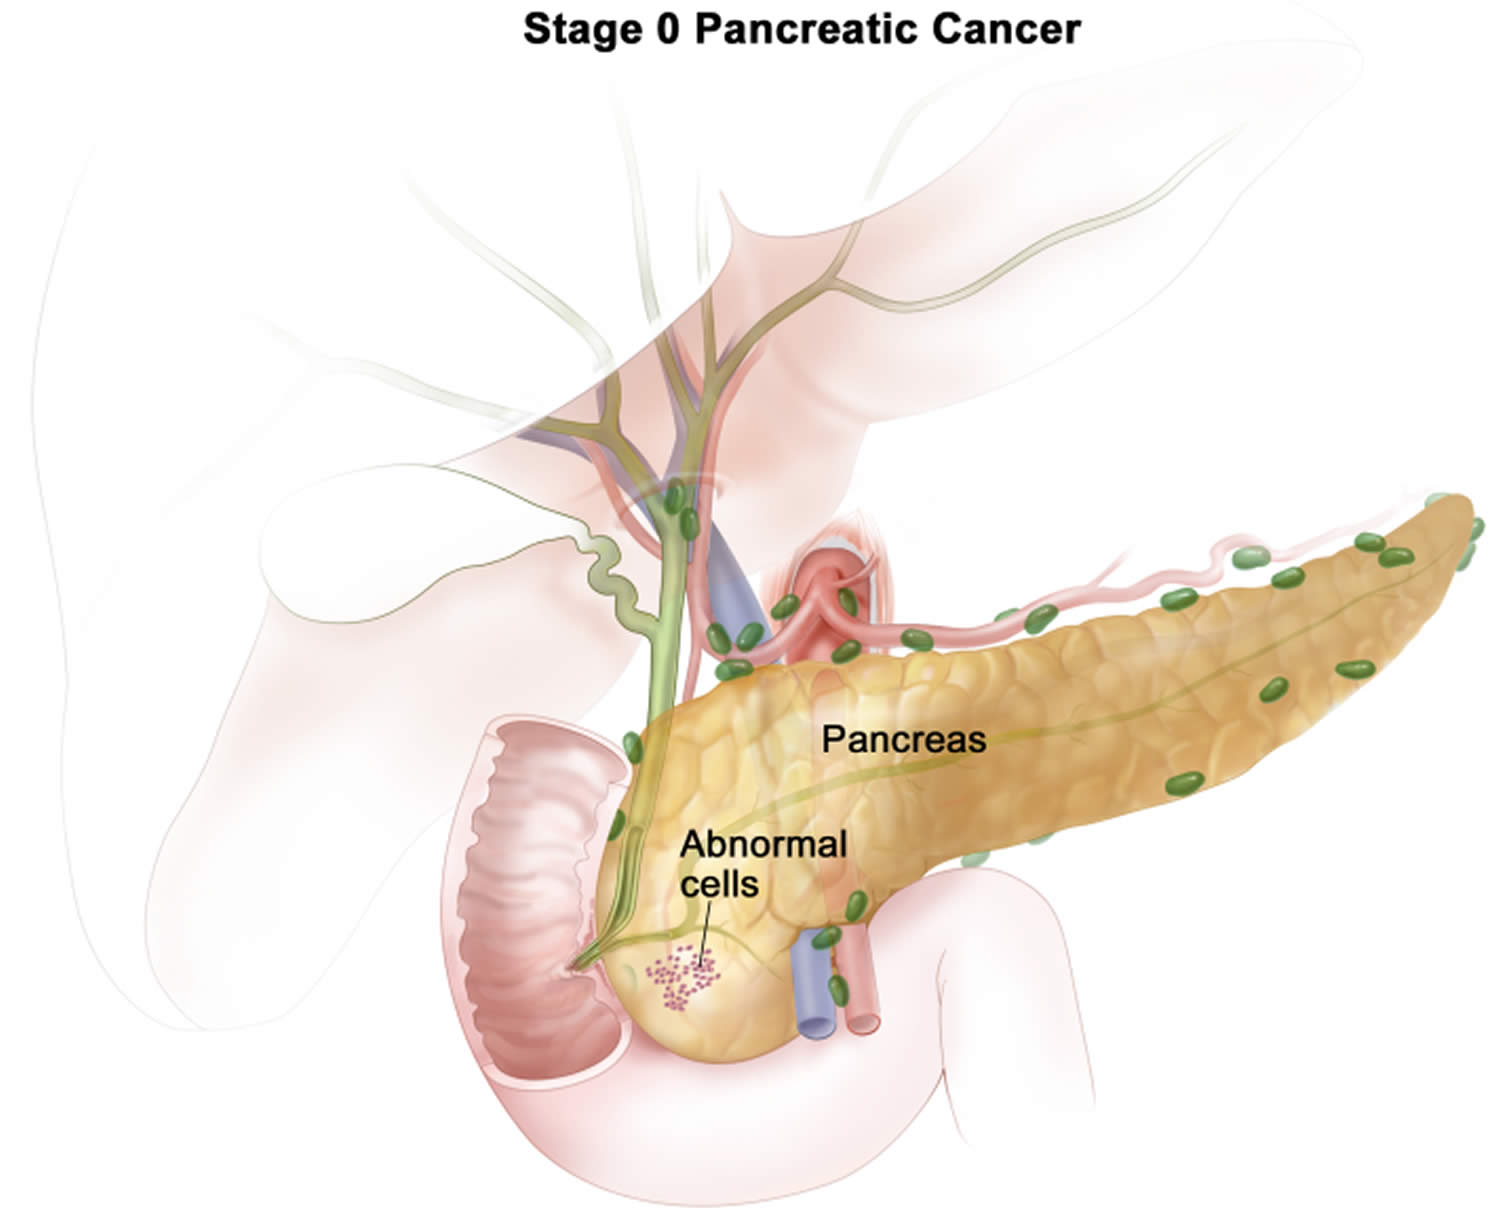 Stage 0 pancreatic cancer